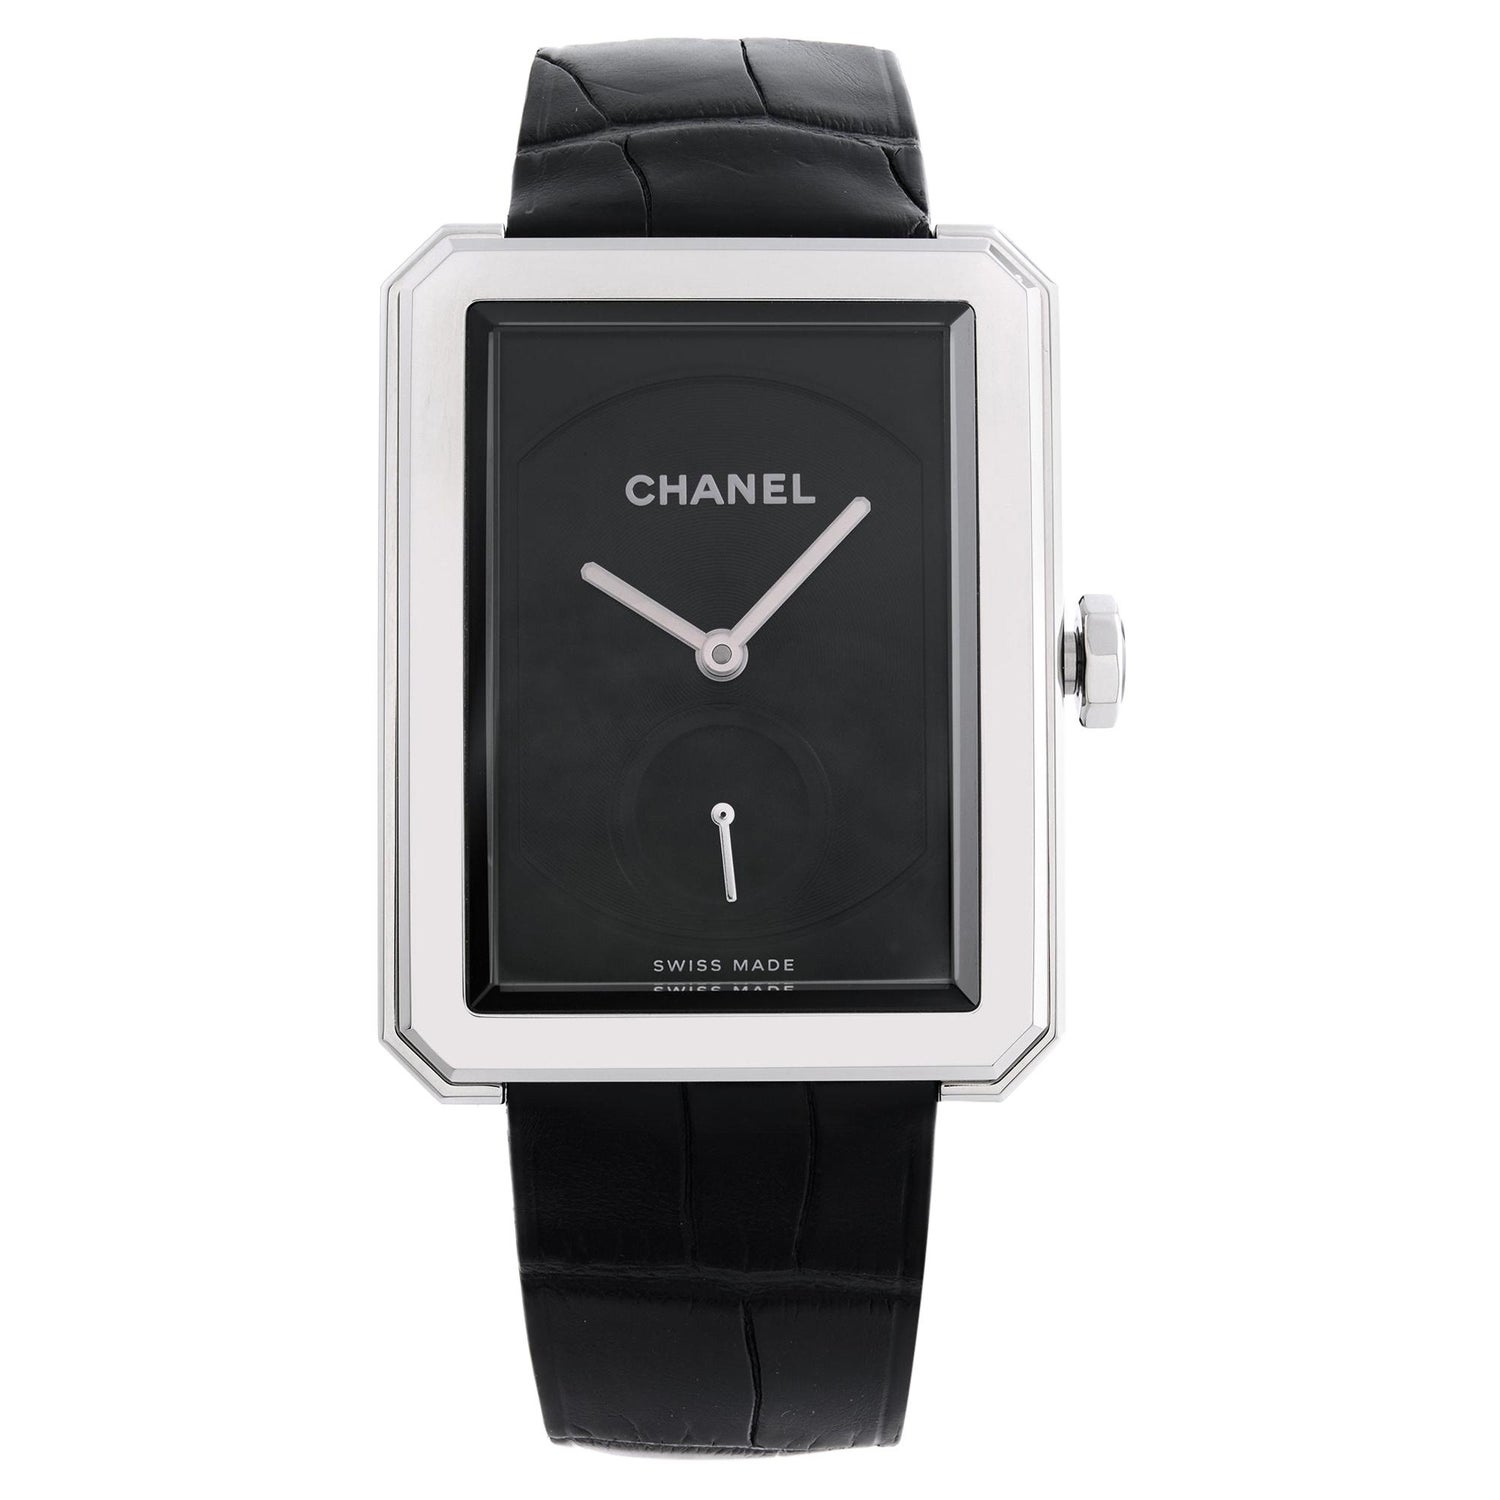 Chanel Watches for Women, Black & White, J12 & Boy-friend Ladies' Watches  for Sale UK